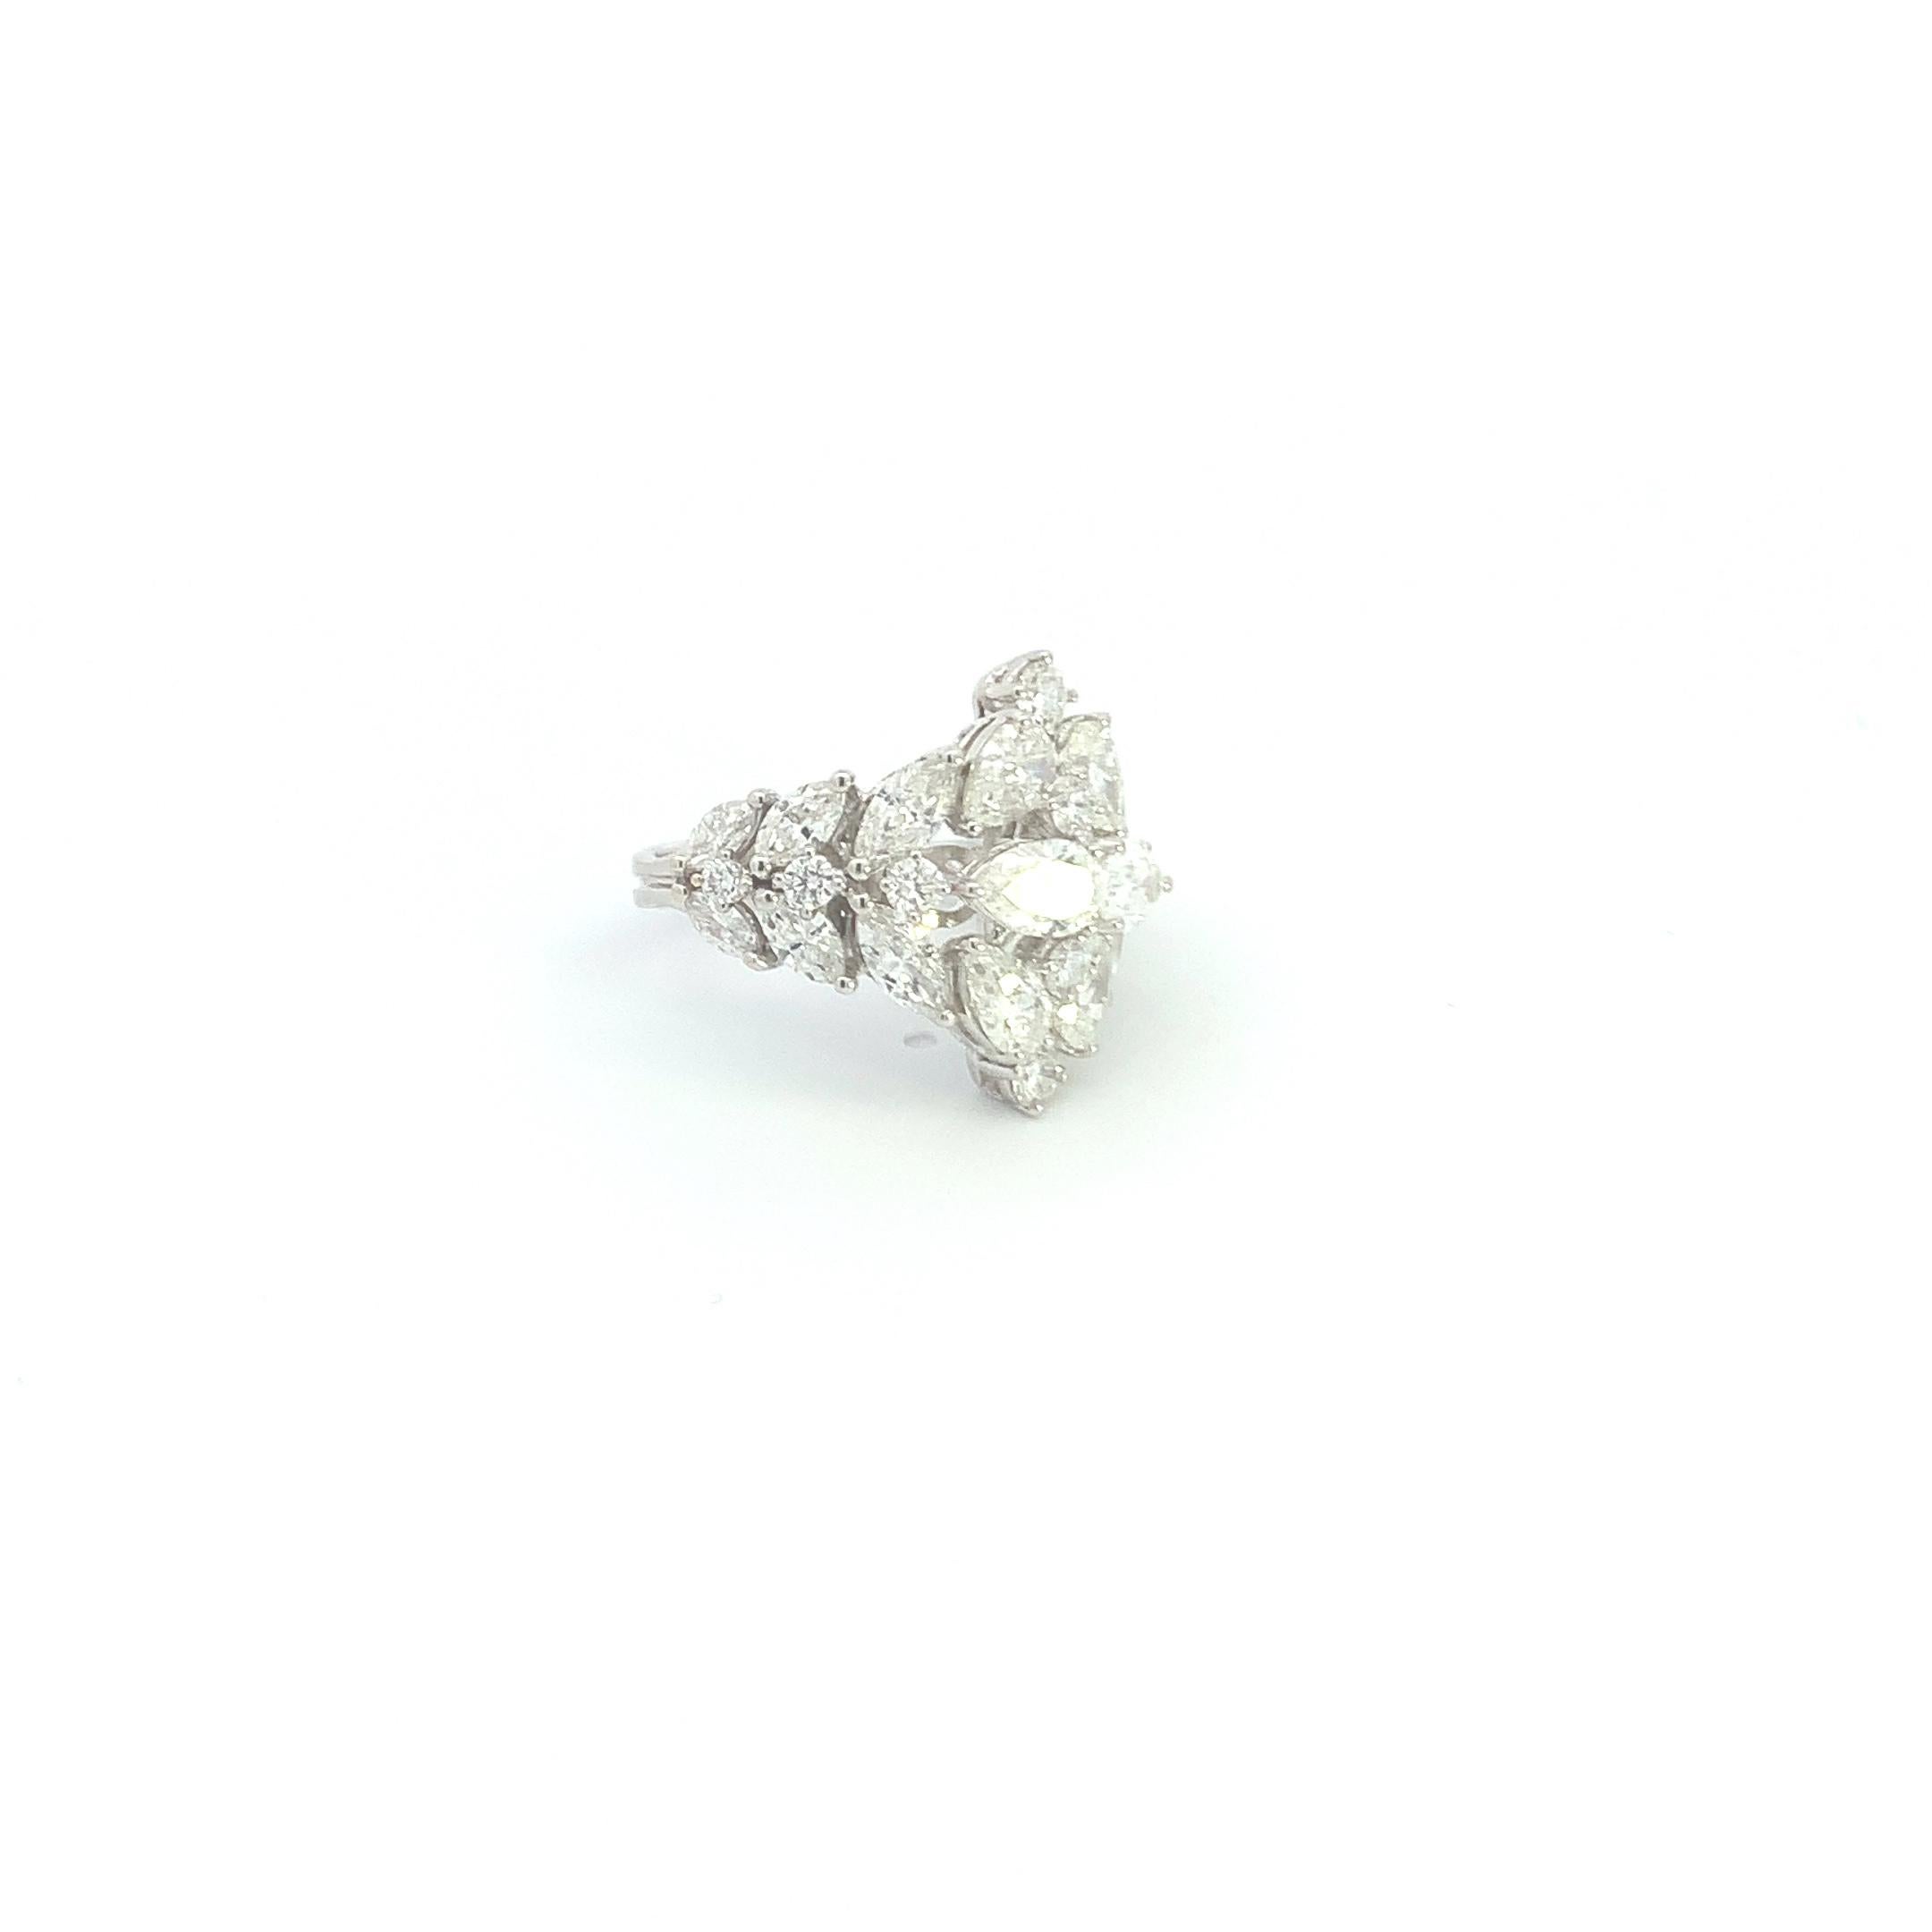 4.20 Cts of Diamonds, G-H Color, VS-SI Clarity
  7.1 Grams of 18K White Gold 
Ref. 152959